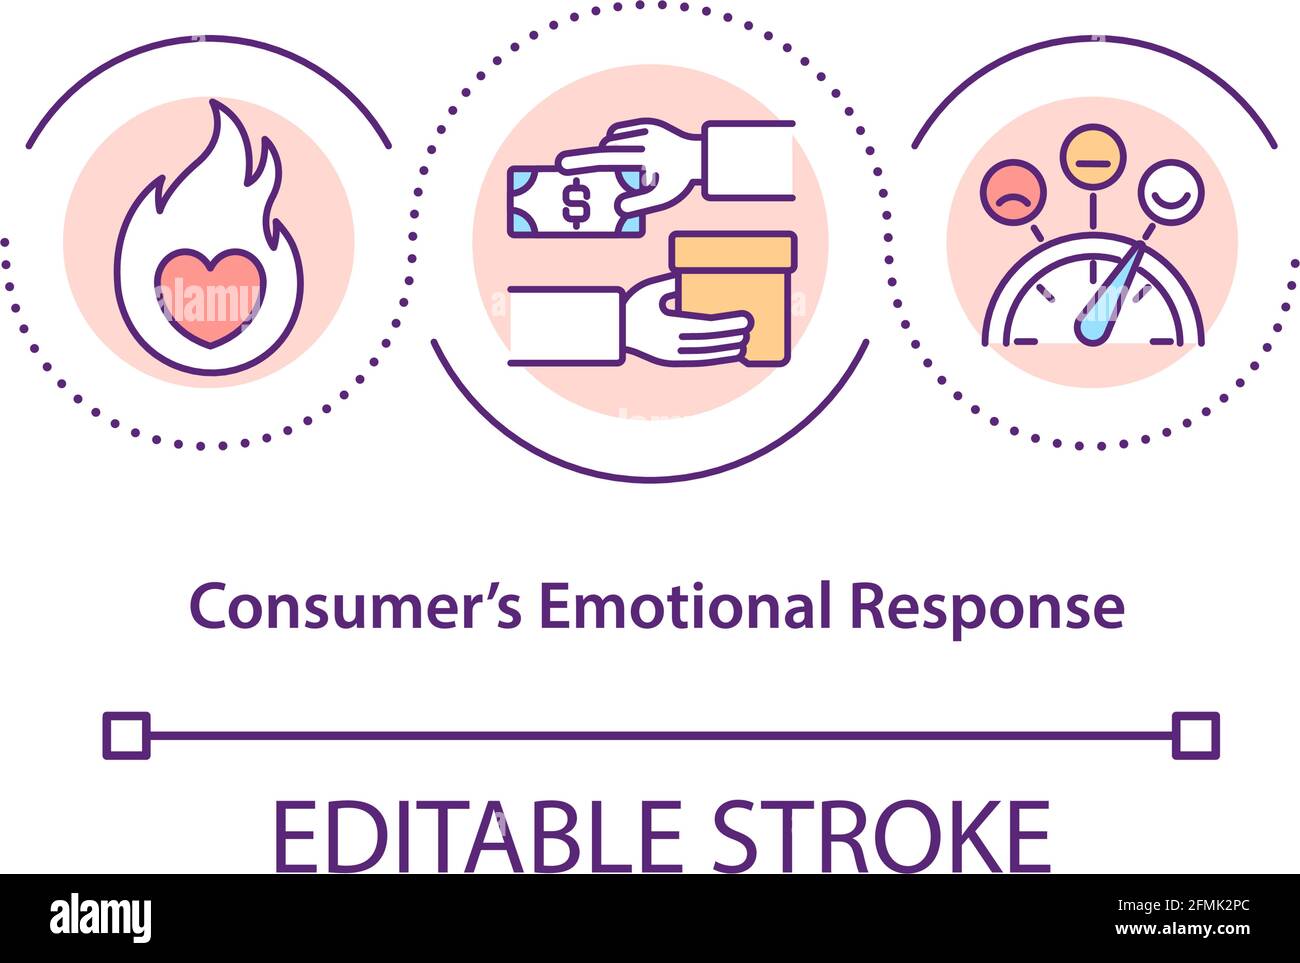 Consumers emotional response concept icon Stock Vector